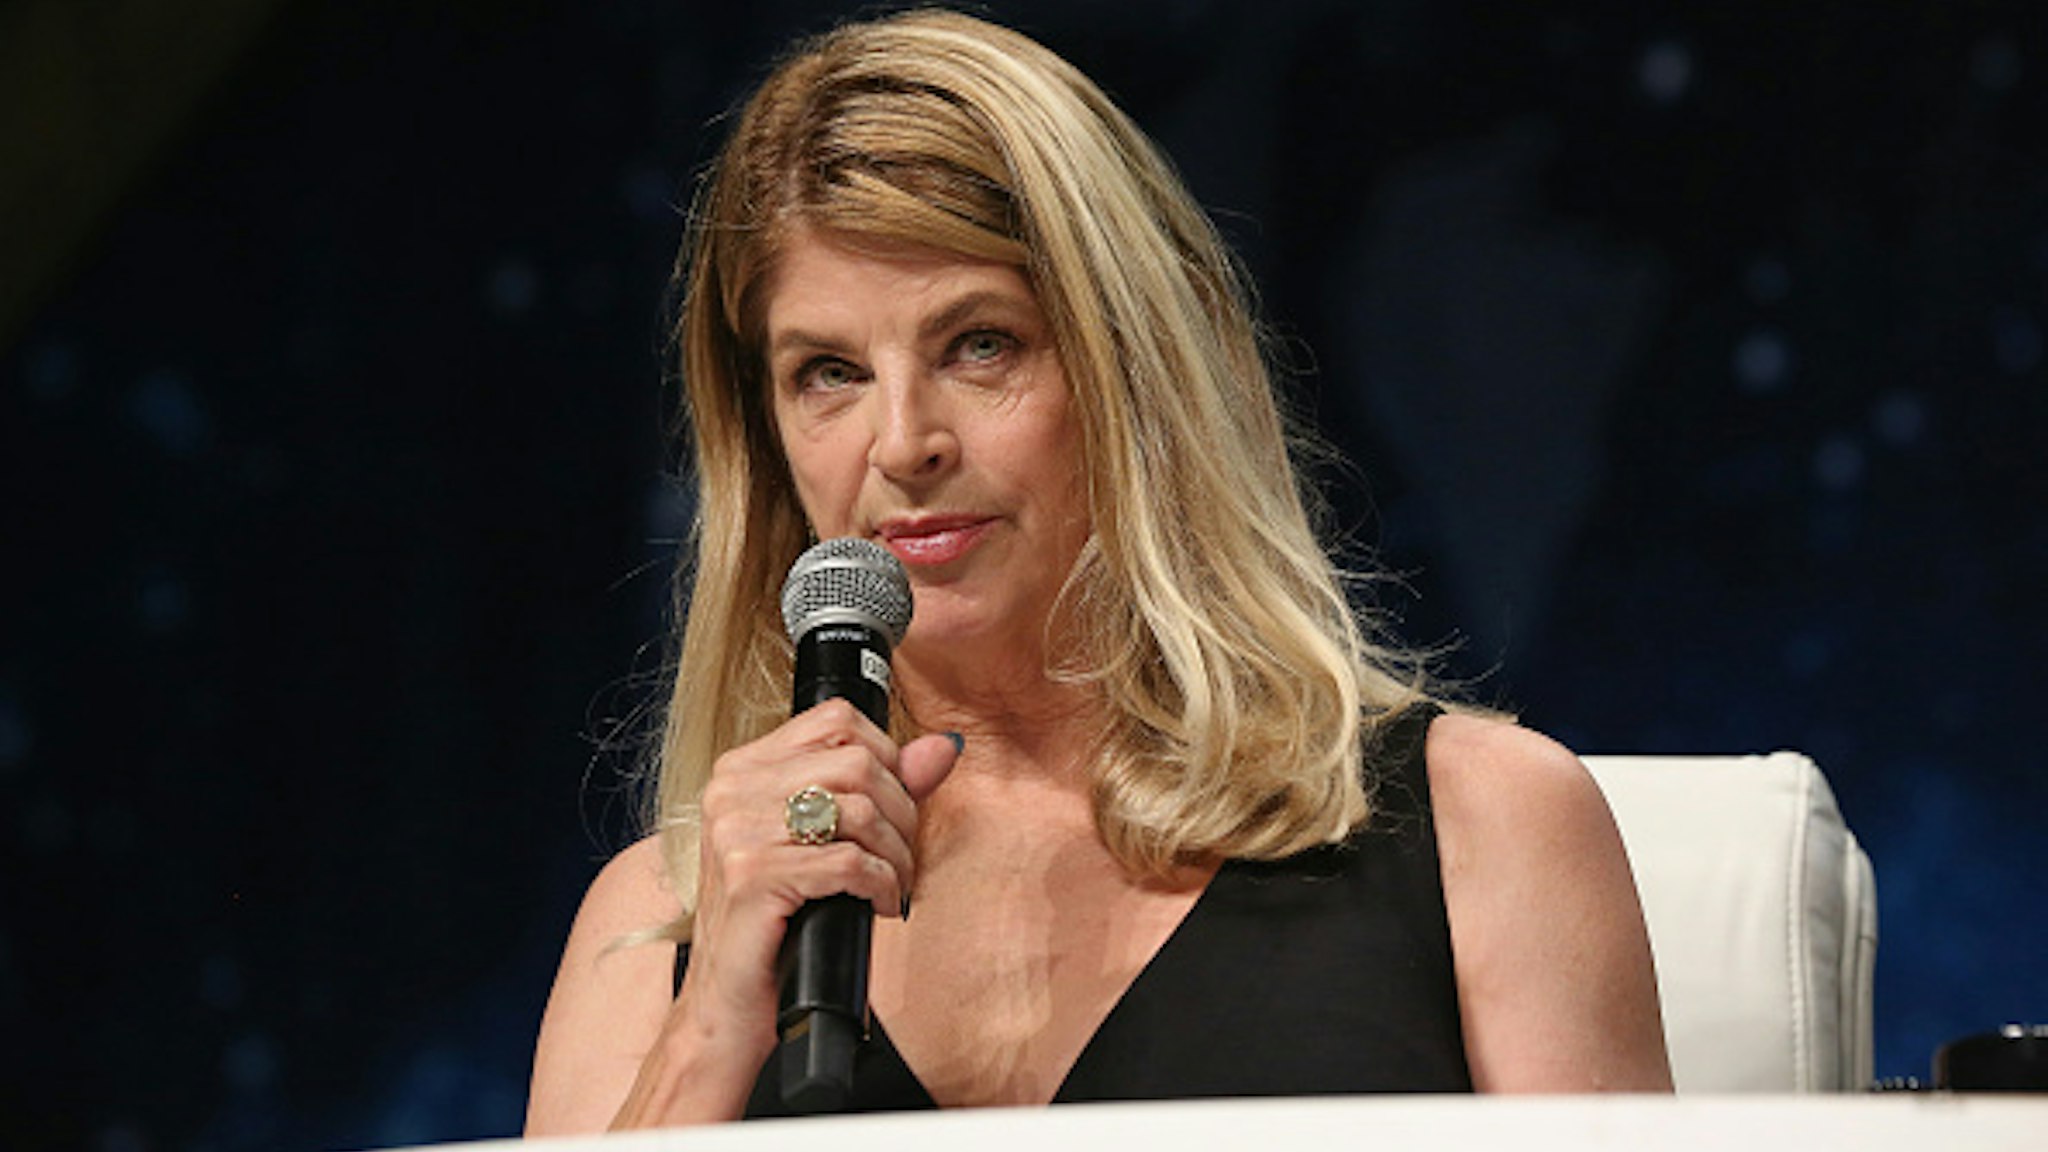 LAS VEGAS, NV - AUGUST 05: Actress Kirstie Alley speaks during the 15th annual official Star Trek convention at the Rio Hotel &amp; Casino on August 5, 2016 in Las Vegas, Nevada.